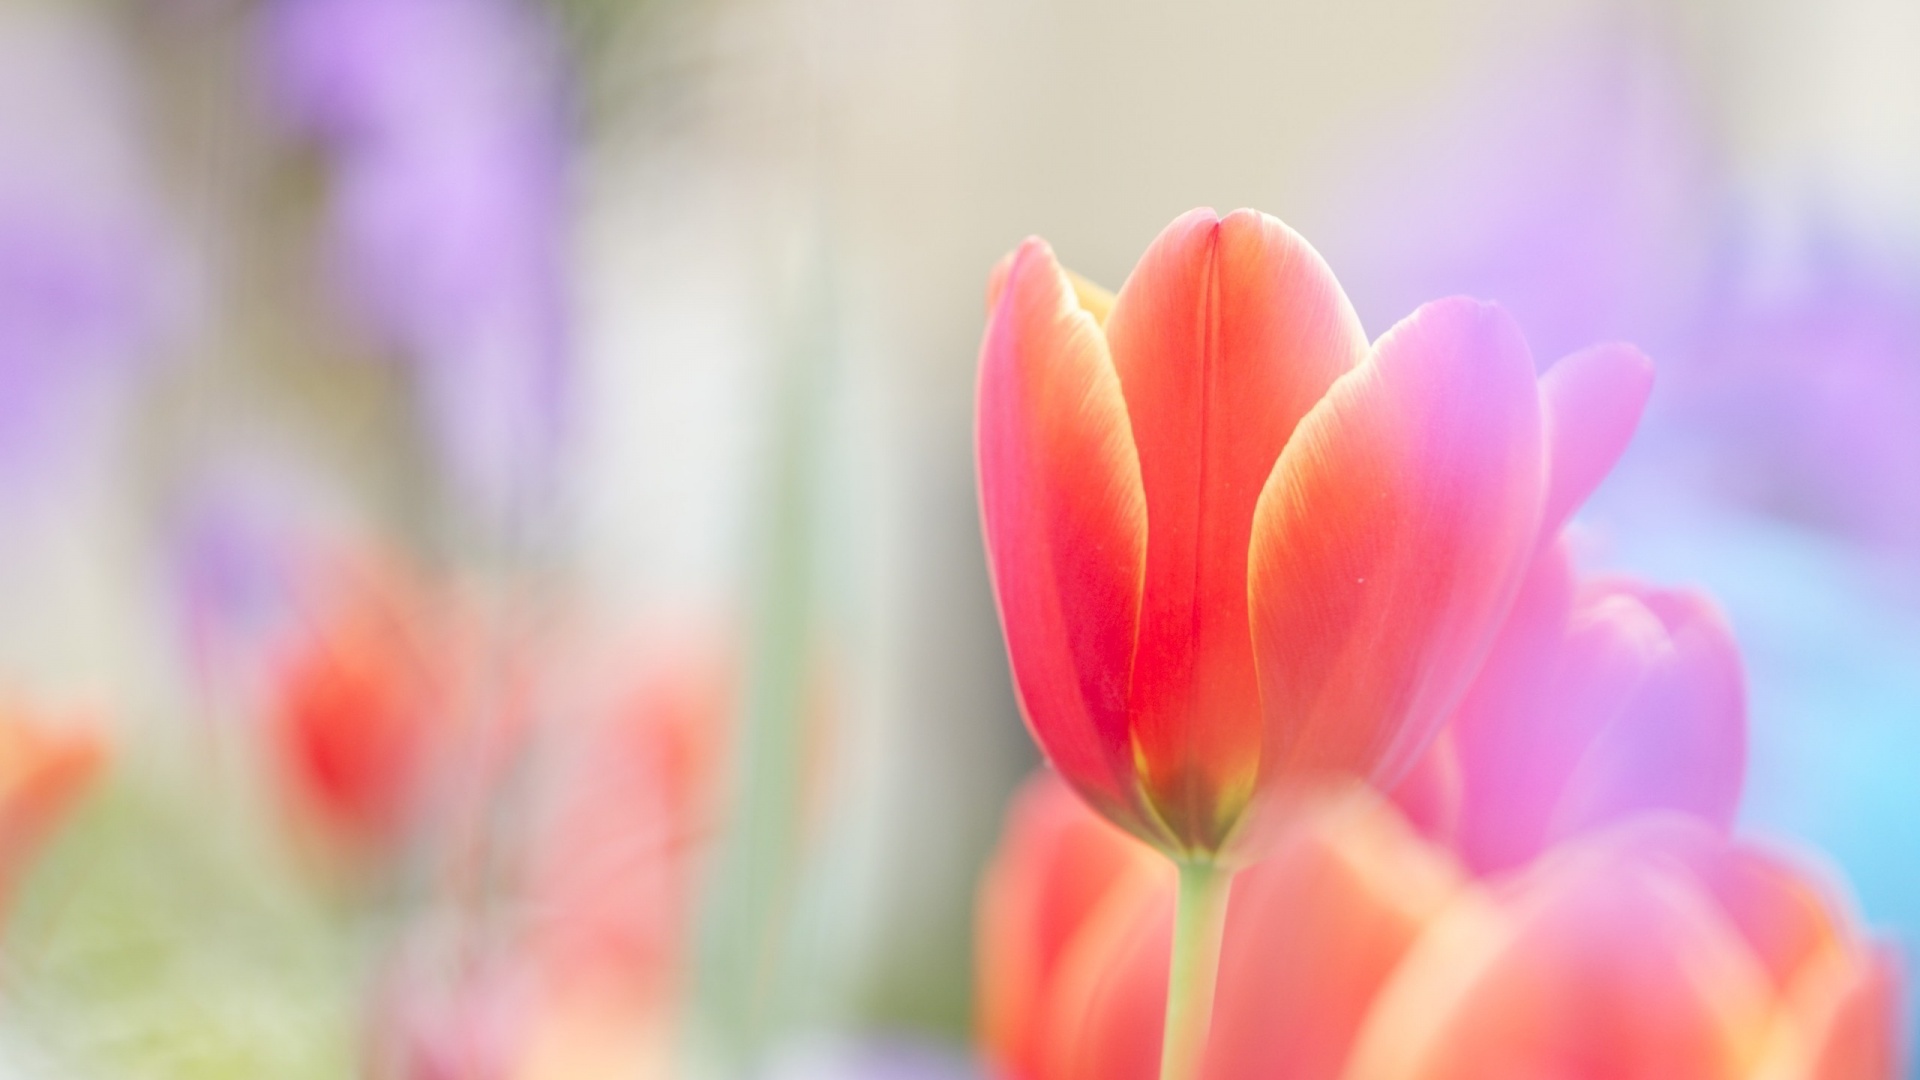 Tulips Background Wallpaper 70 images